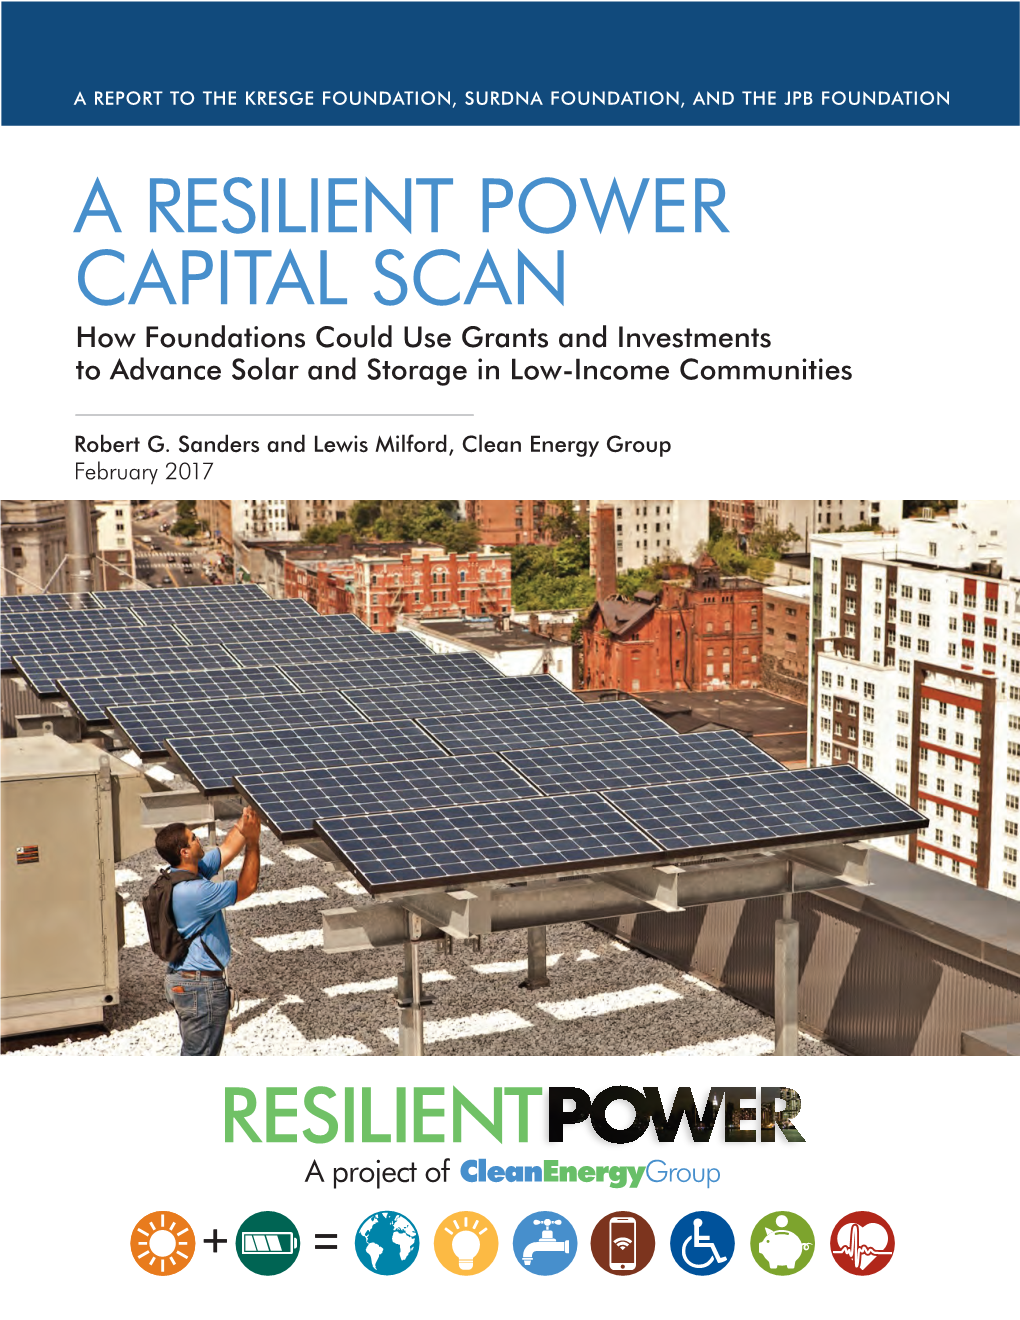 A Resilient Power Capital Scan How Foundations Could Use Grants and Investments to Advance Solar and Storage in Low-Income Communities